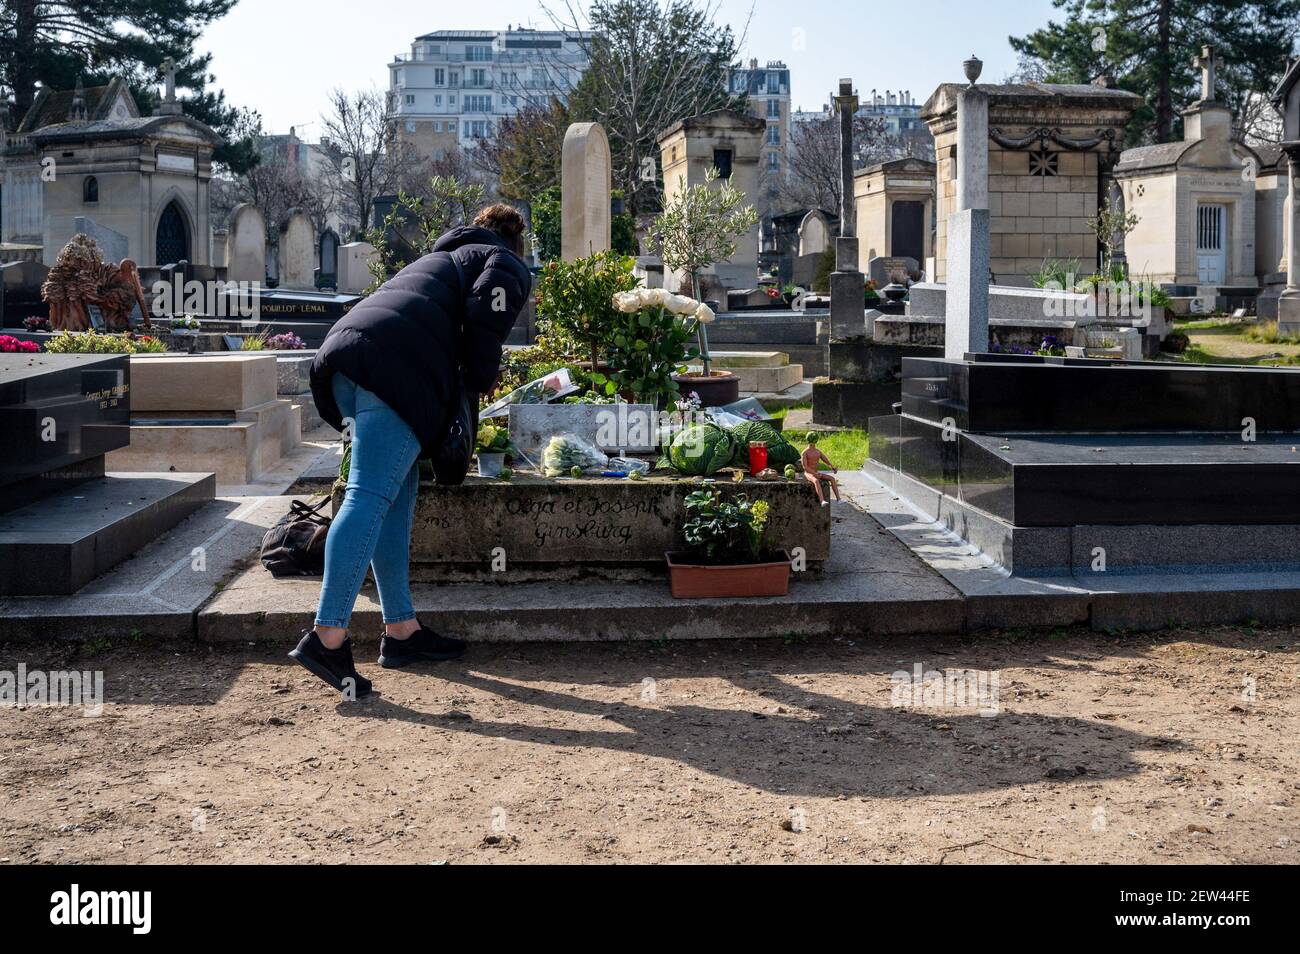 Fans gather next to the late singer and author Serge GanisbourgâÂ€Â™s grave, in Montparnasse cemetery in Paris, France, on March 2, 2021, on the very day that Gainsbourg passed away 30 years ago, on March 2, 1991. Photo by Ammar Abd Rabbo/ABACAPRESS.COM Stock Photo